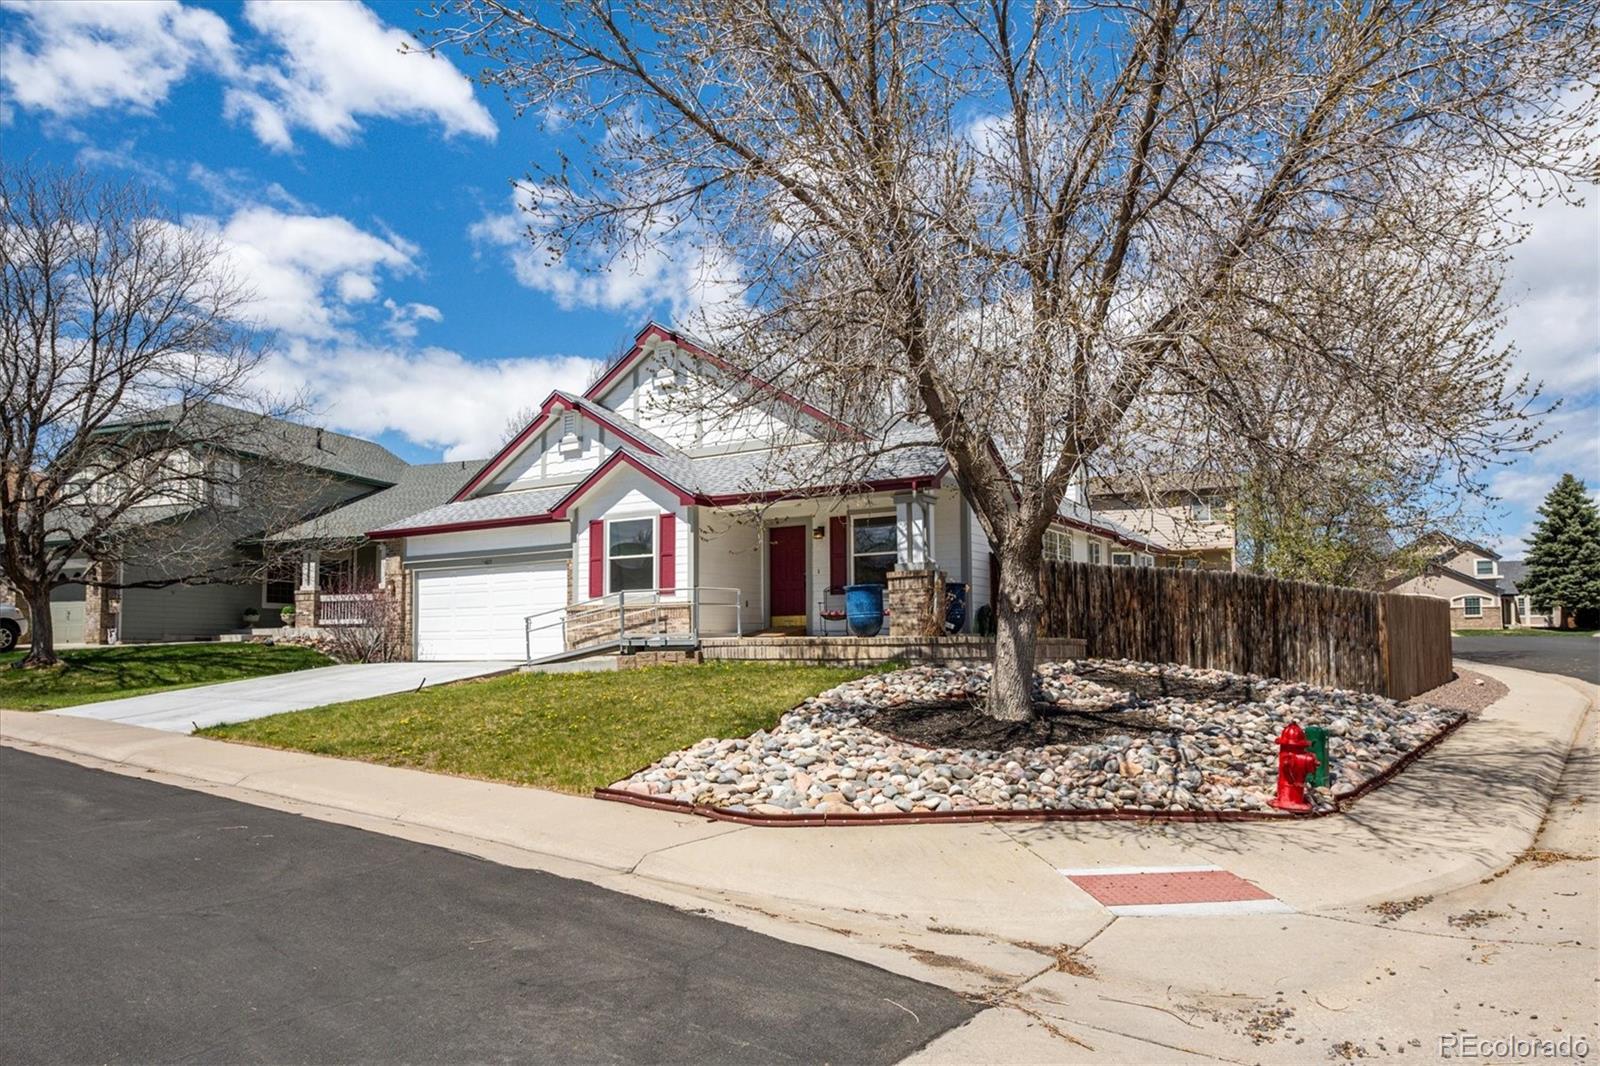 Report Image for 4615 W 112th Court,Westminster, Colorado